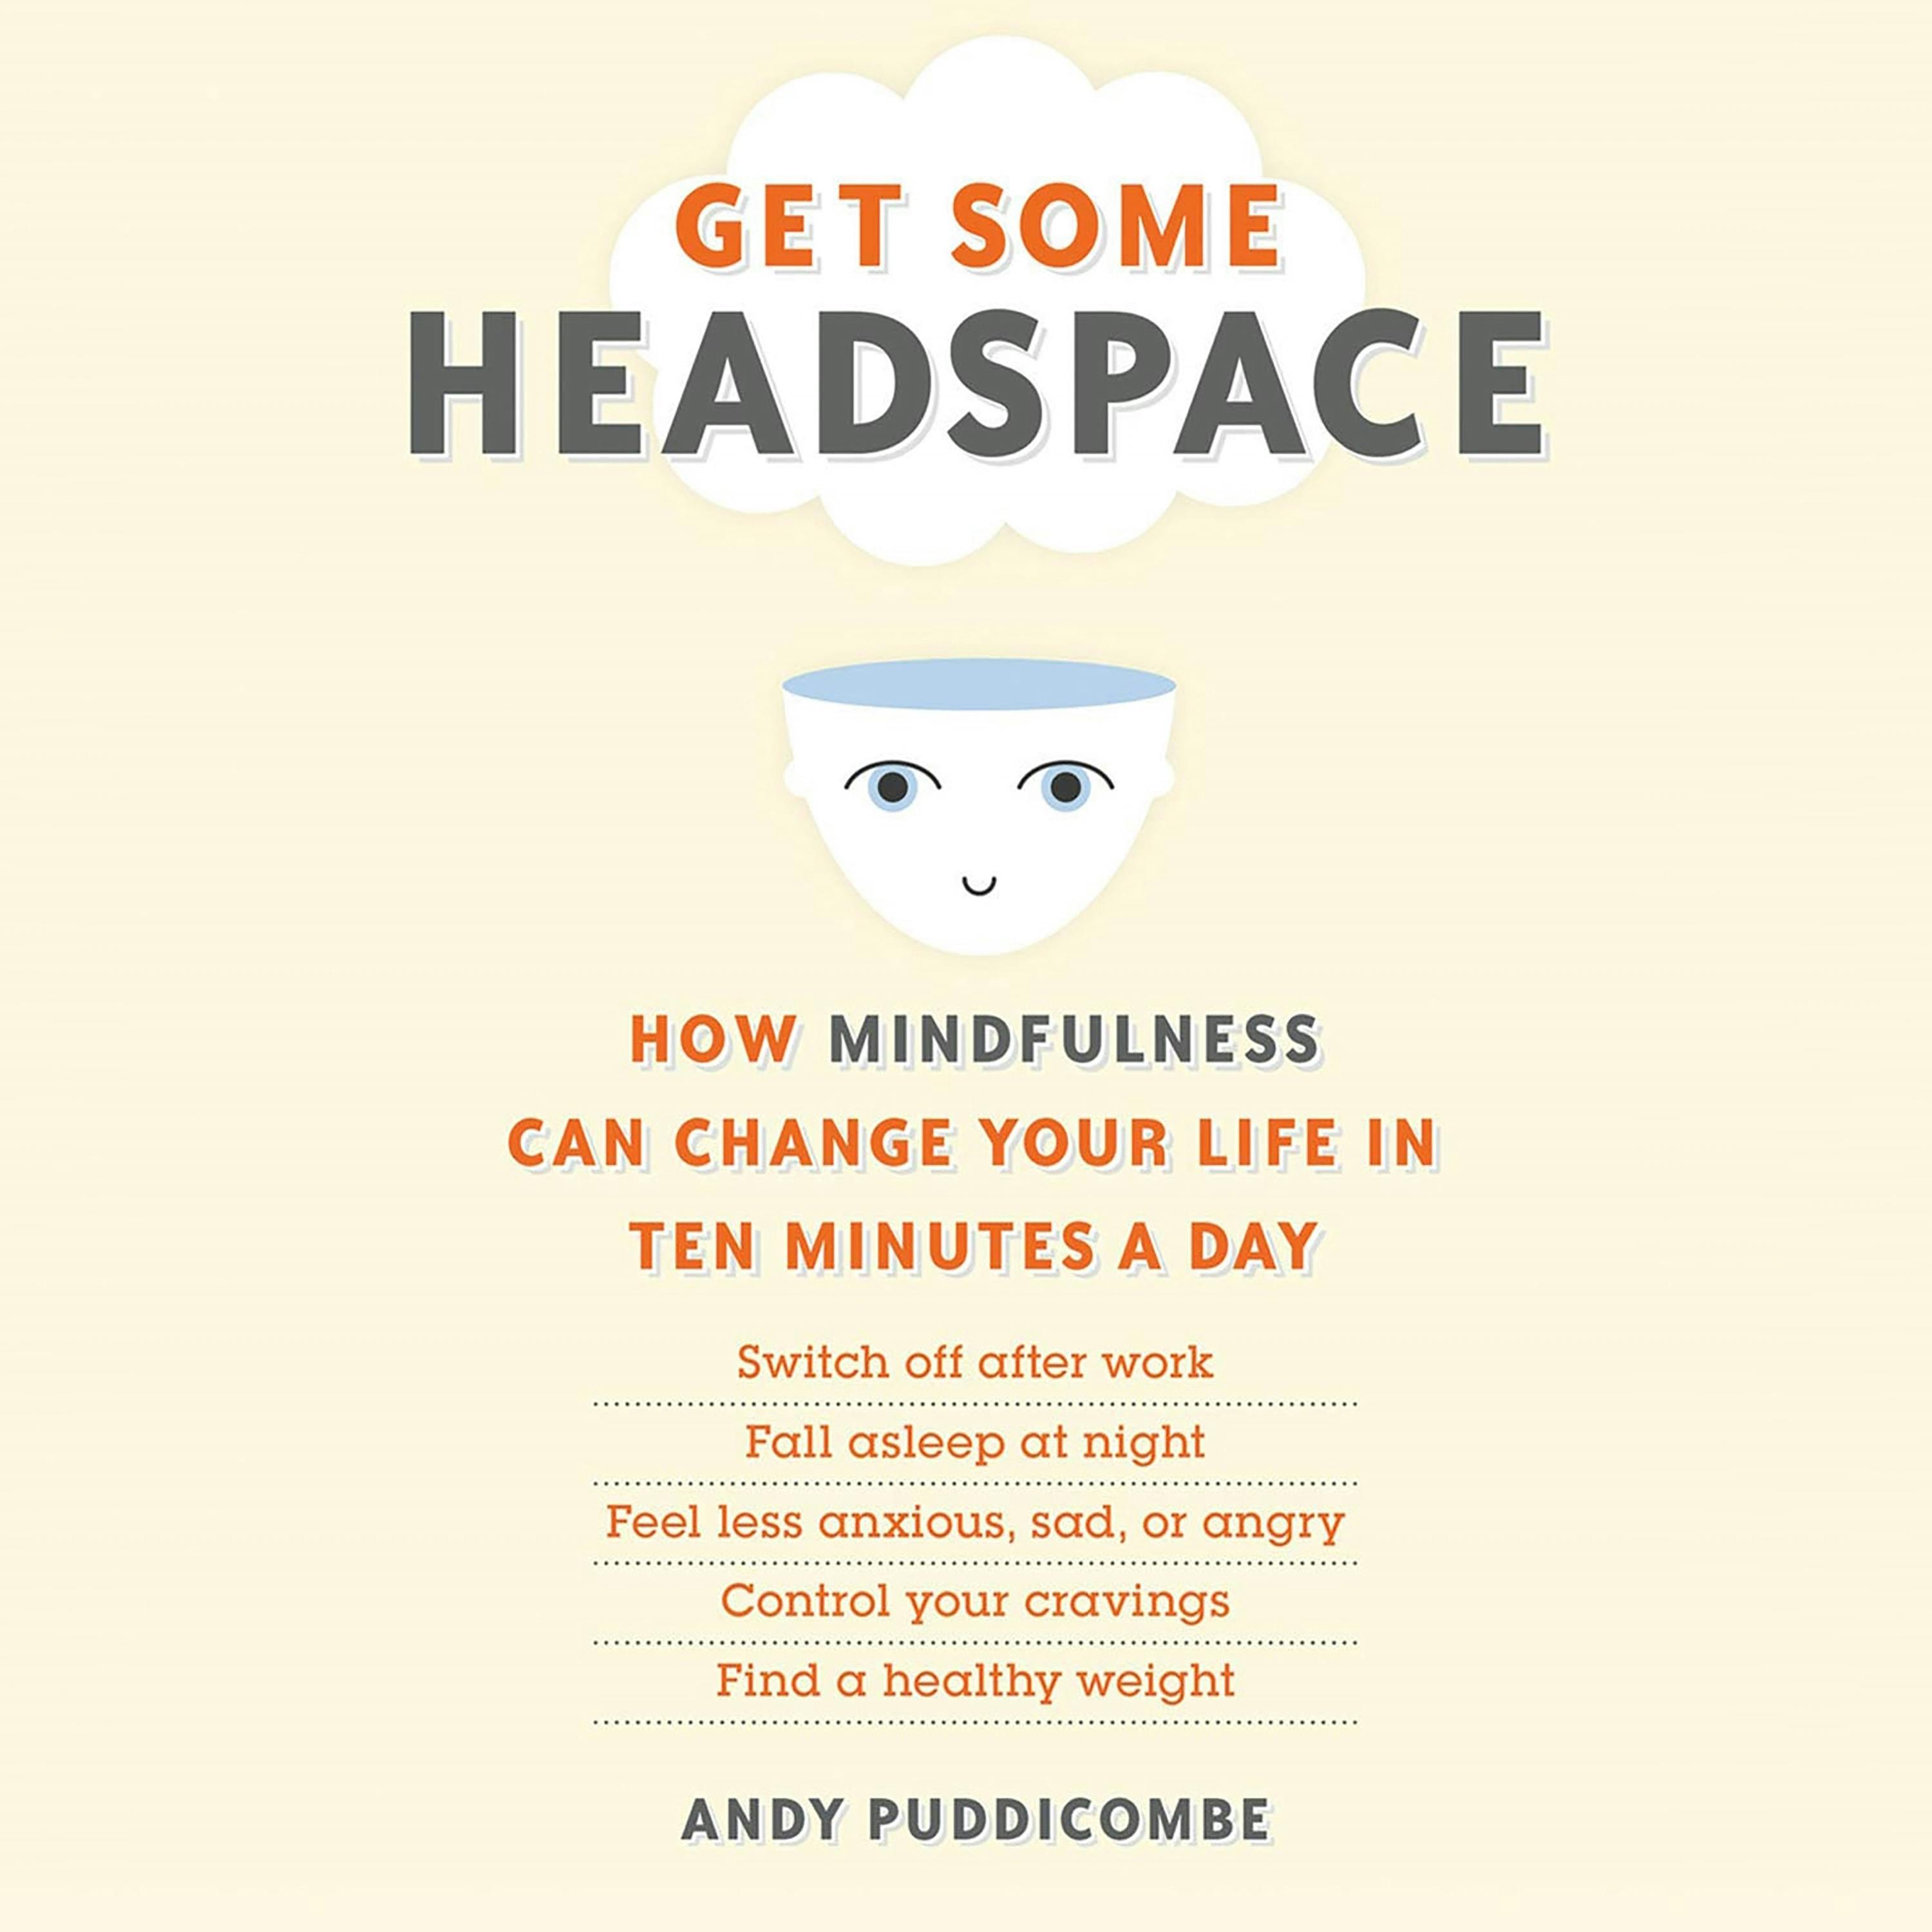 3 Best Andy Puddicombe Books on Mindfulness (With Reviews) - Mindful Spot